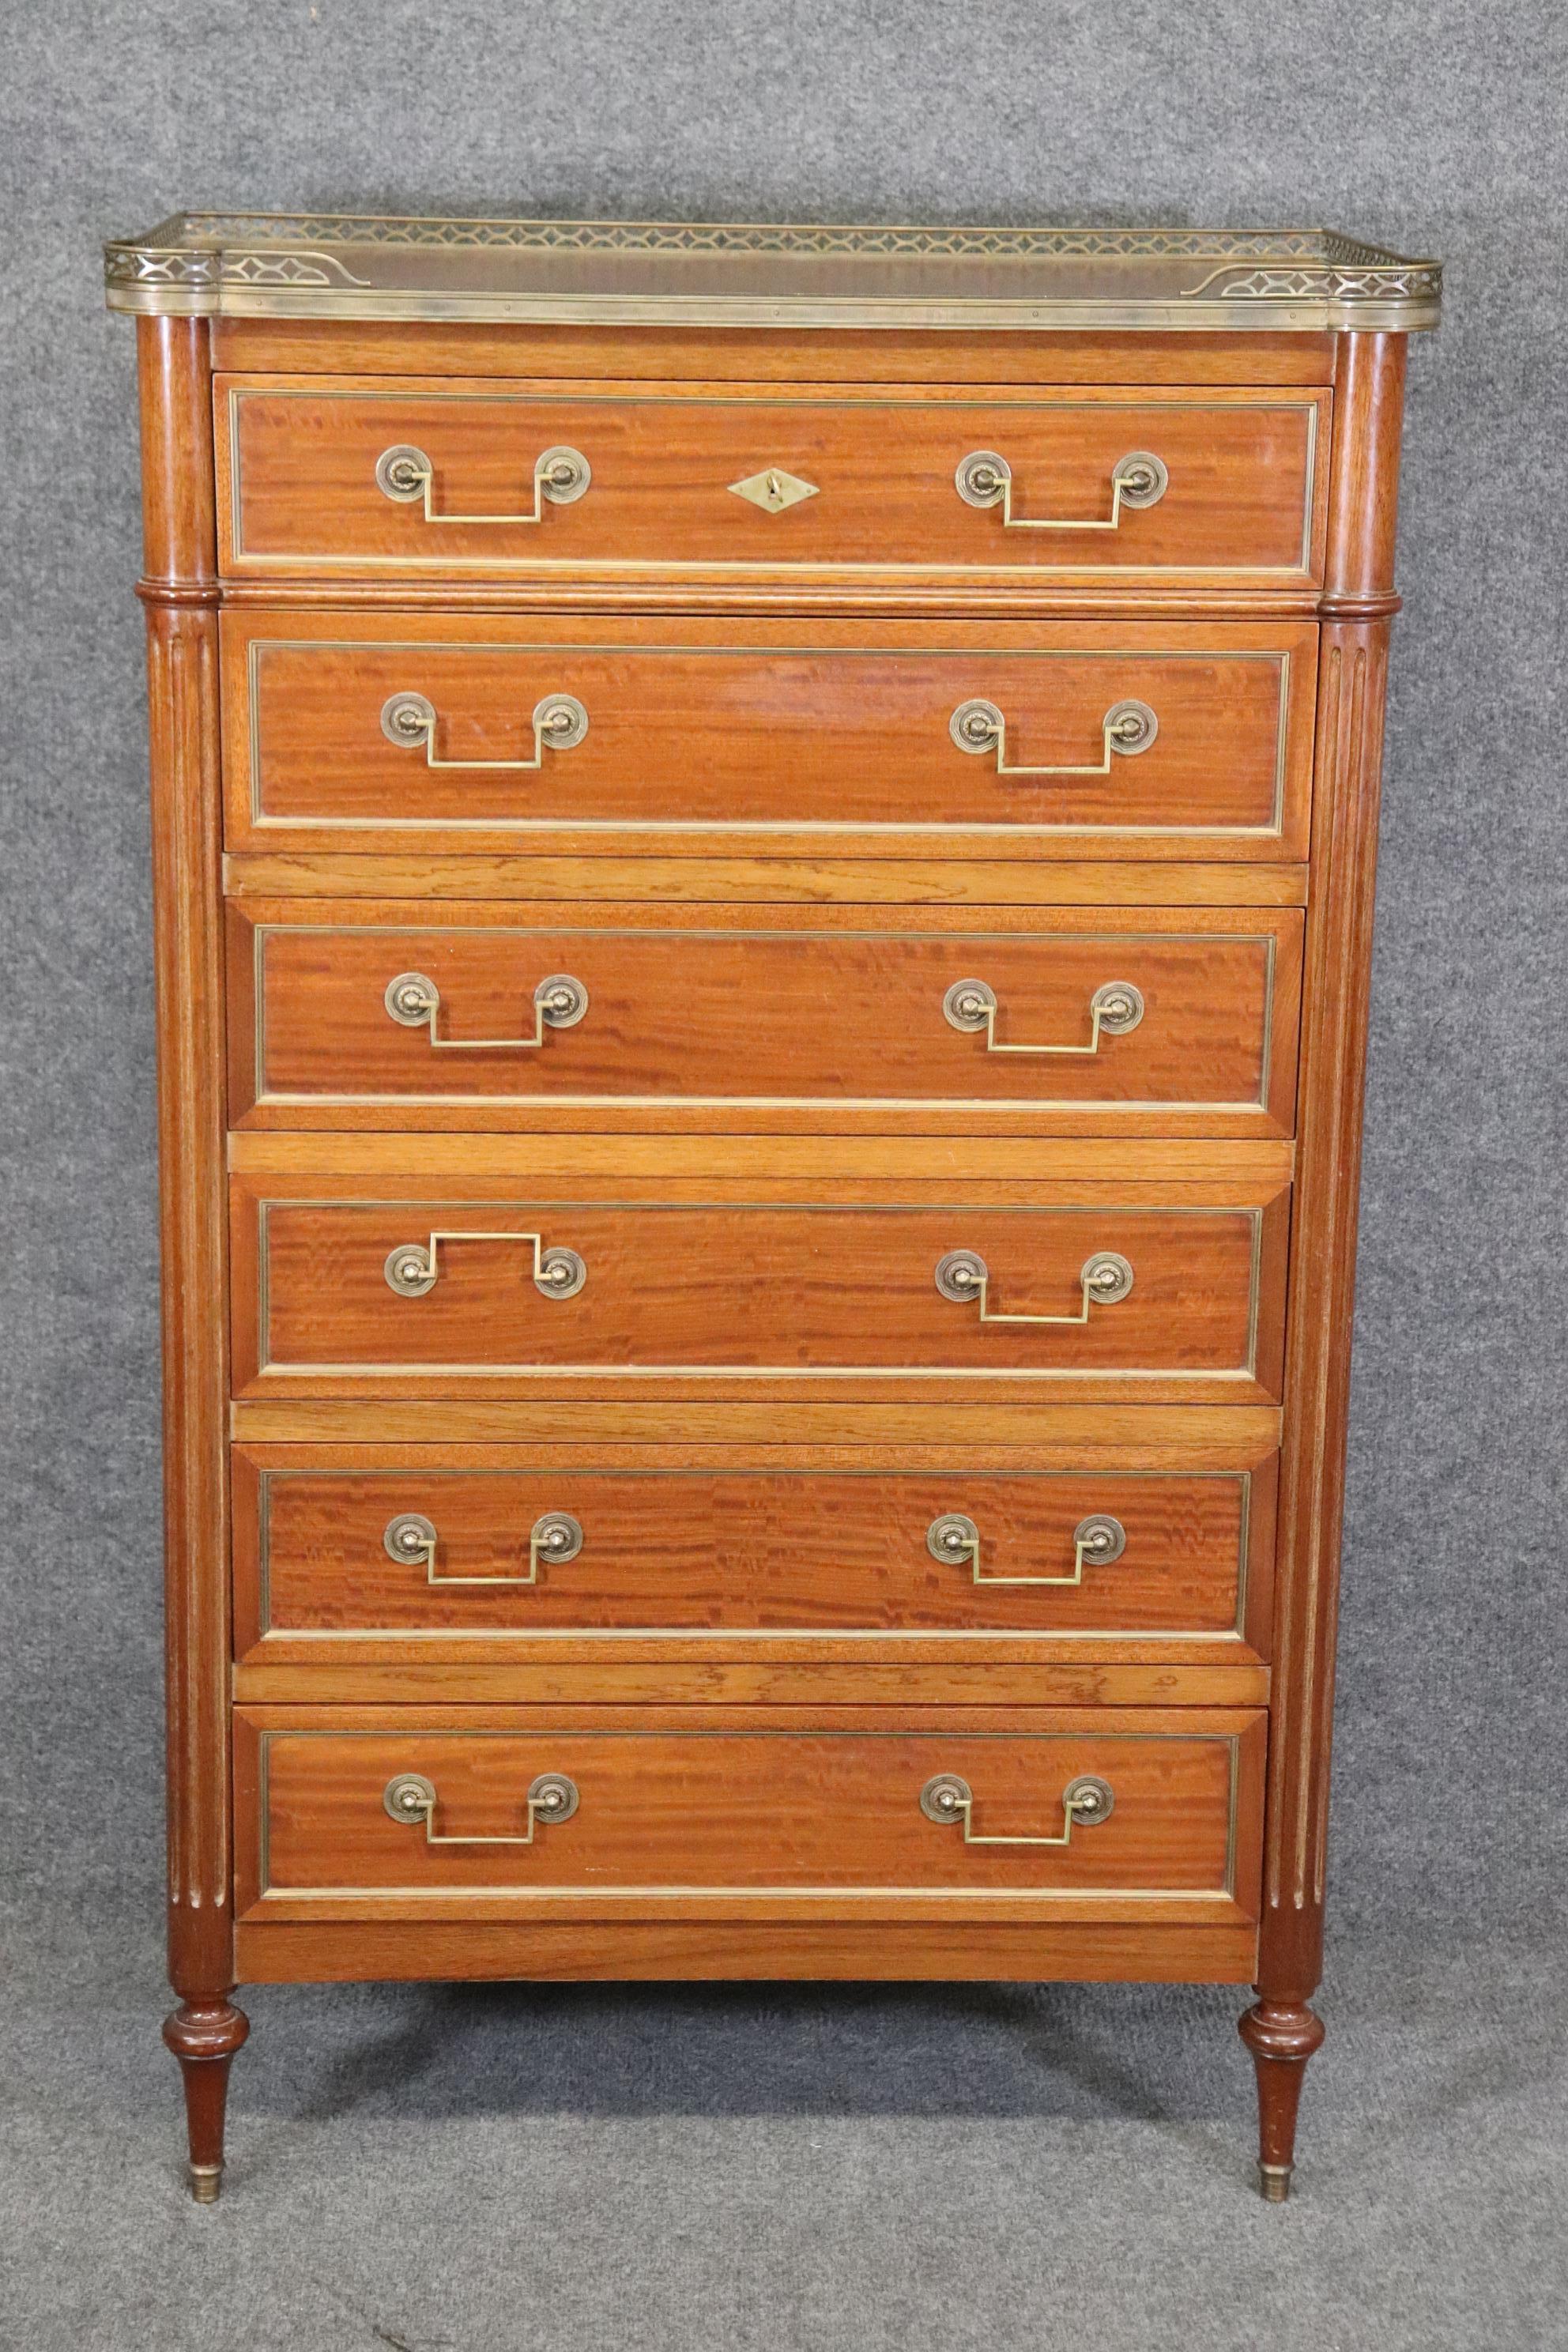 These don't normally have satinwood cases! They are usually walnut or cherry, but rarely satinwood. The brass trim and gallery are top quality as is the original hardware, case and finish. The dresser features 6 drawers and fantastic wood quality